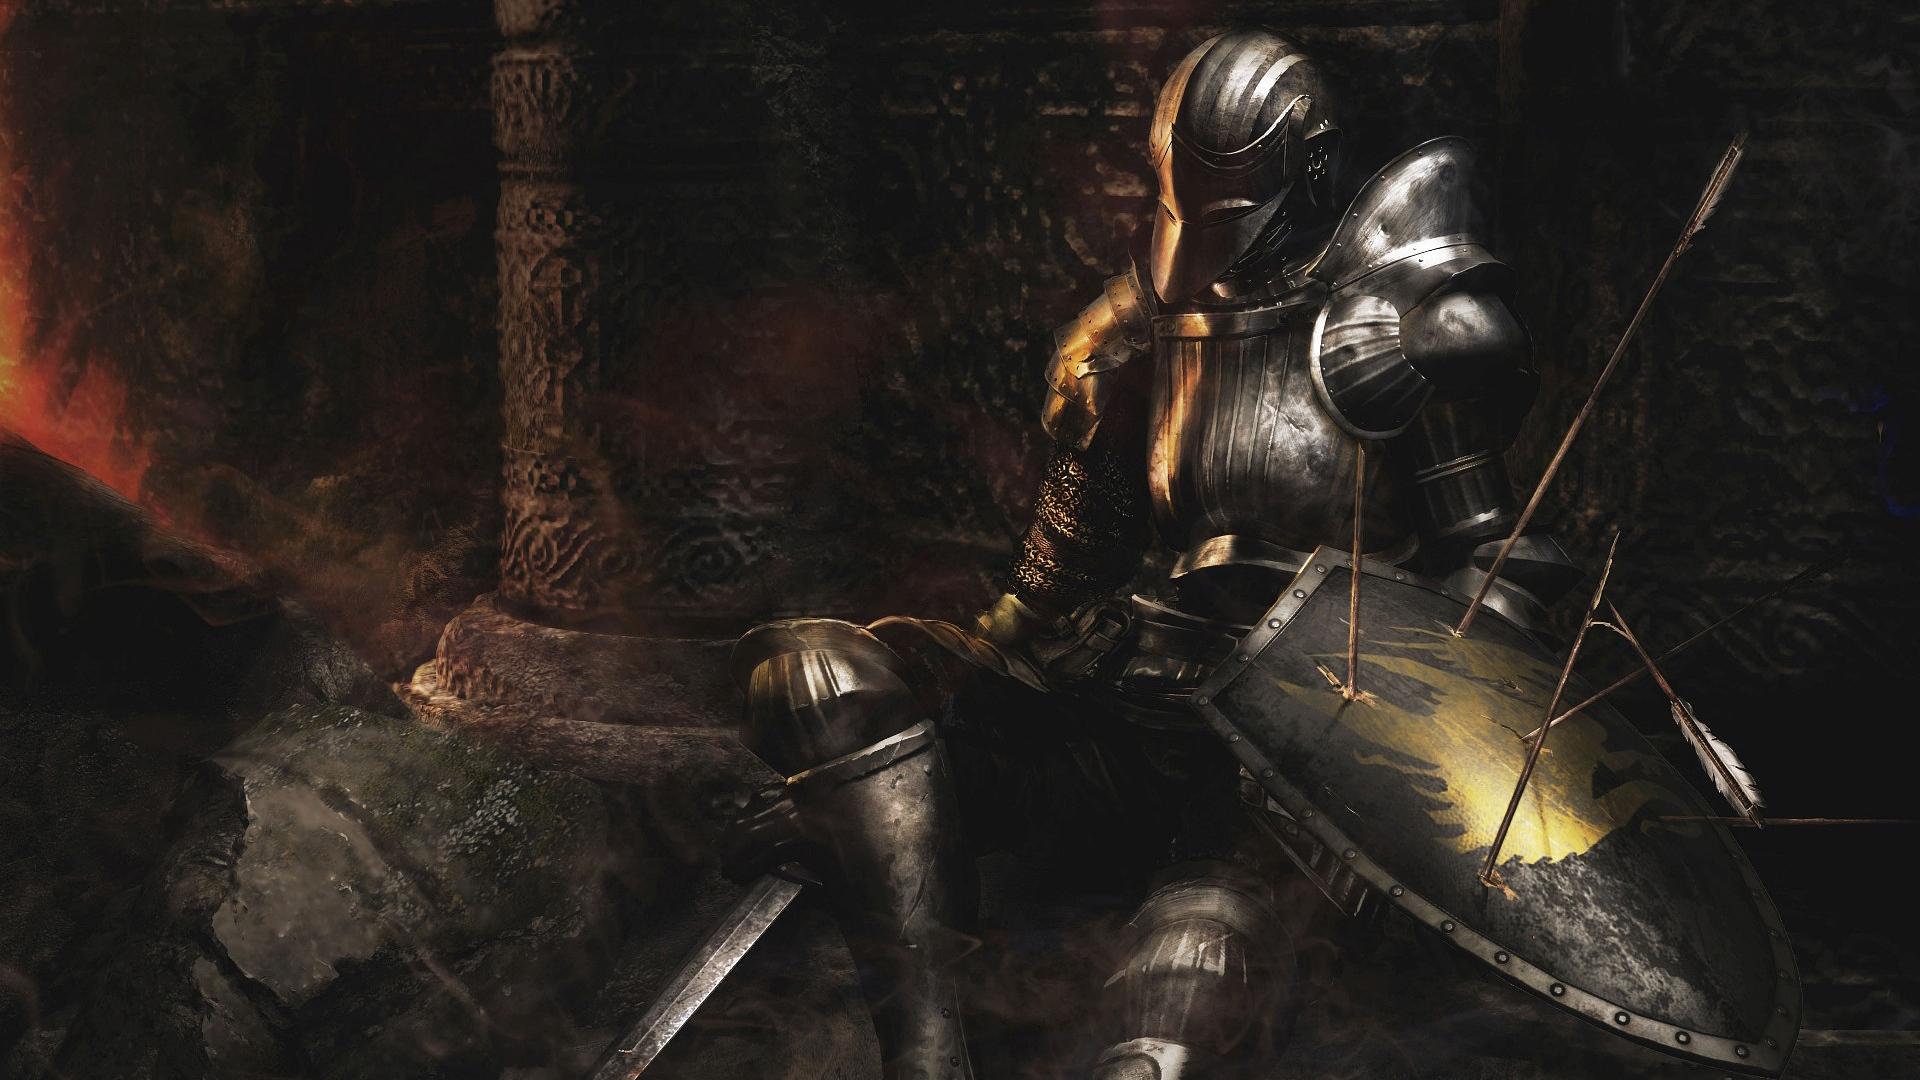 Elden Ring: From Software's latest project seemingly leaks